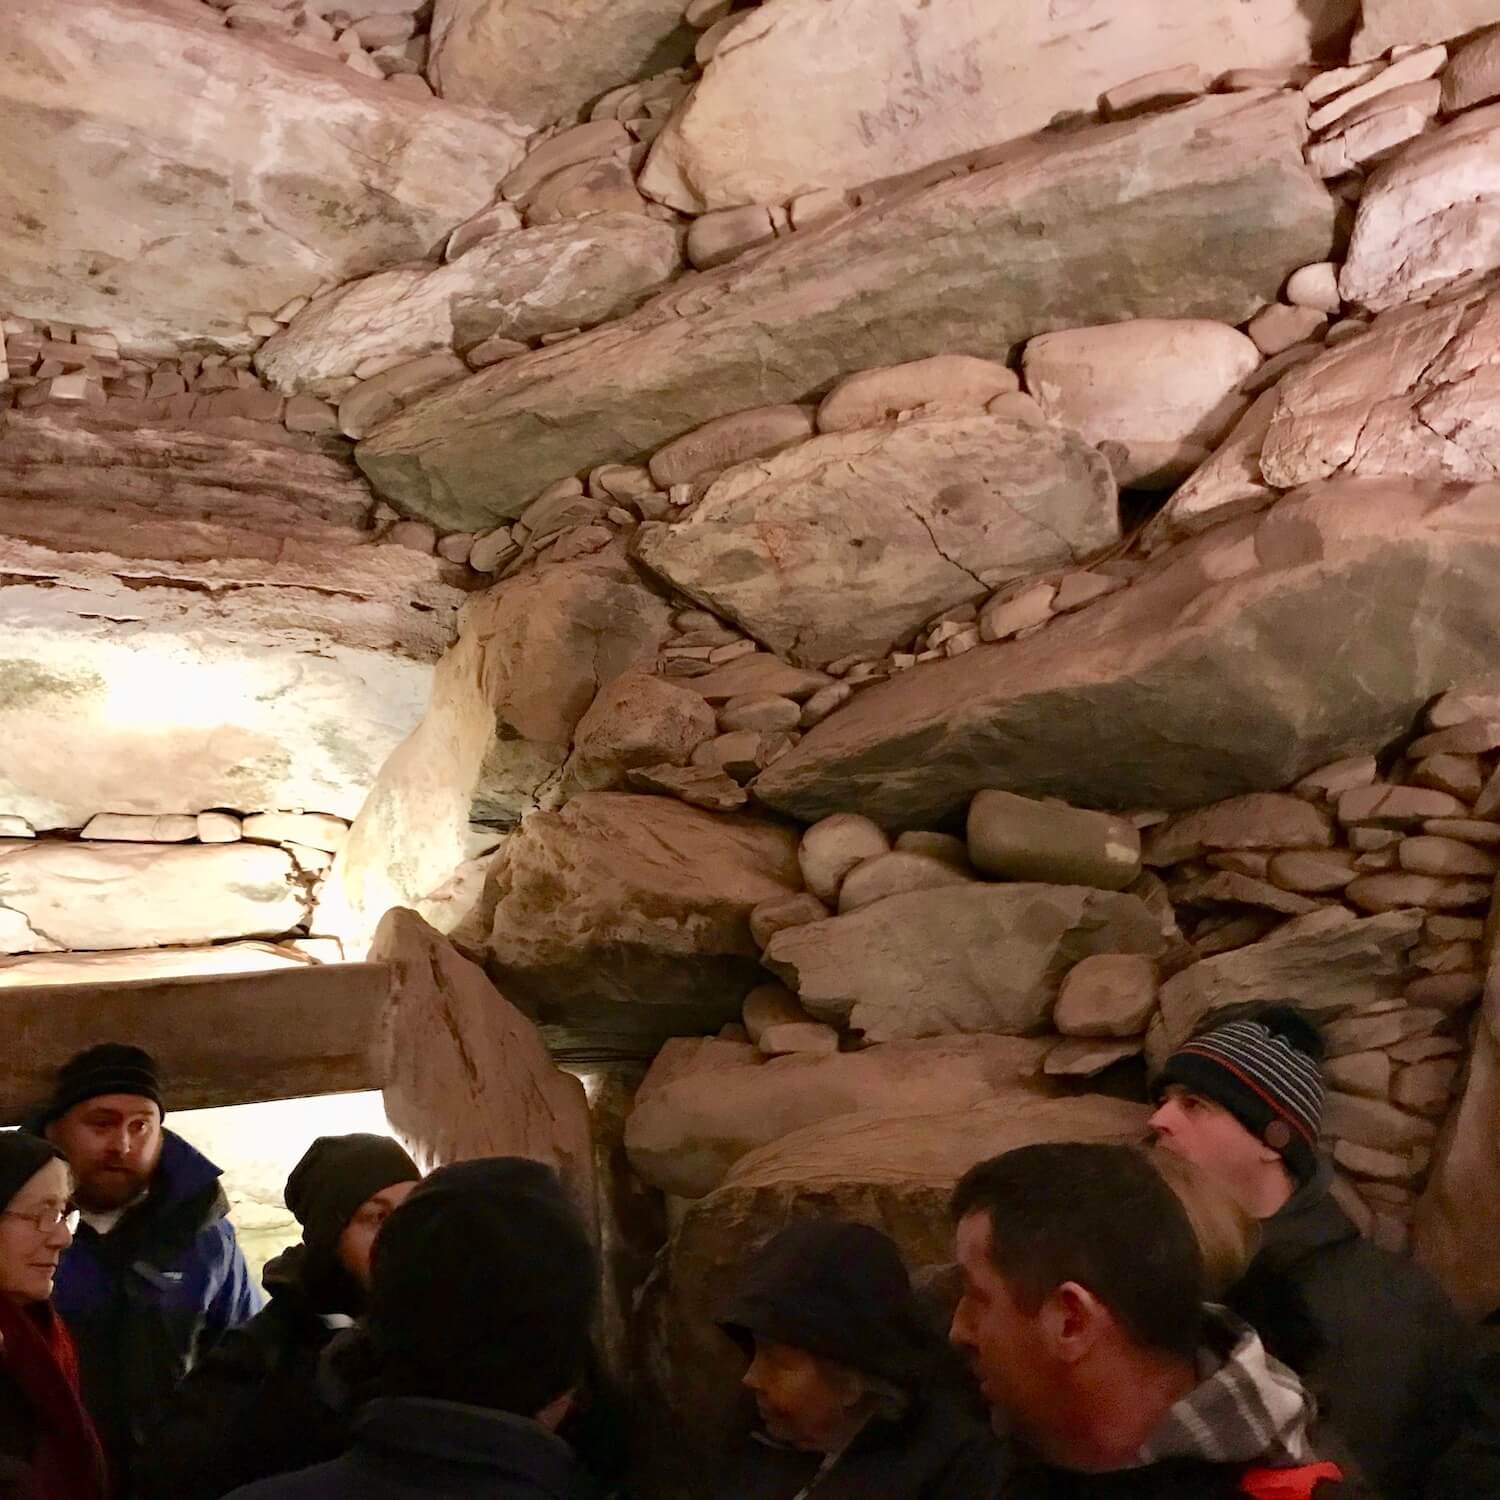 The dome inside the cave at the center of ancient Newgrange in Ireland during the winter solstice. There are rocks of various sizes perfectly squeezed together to create a water tight cavern.